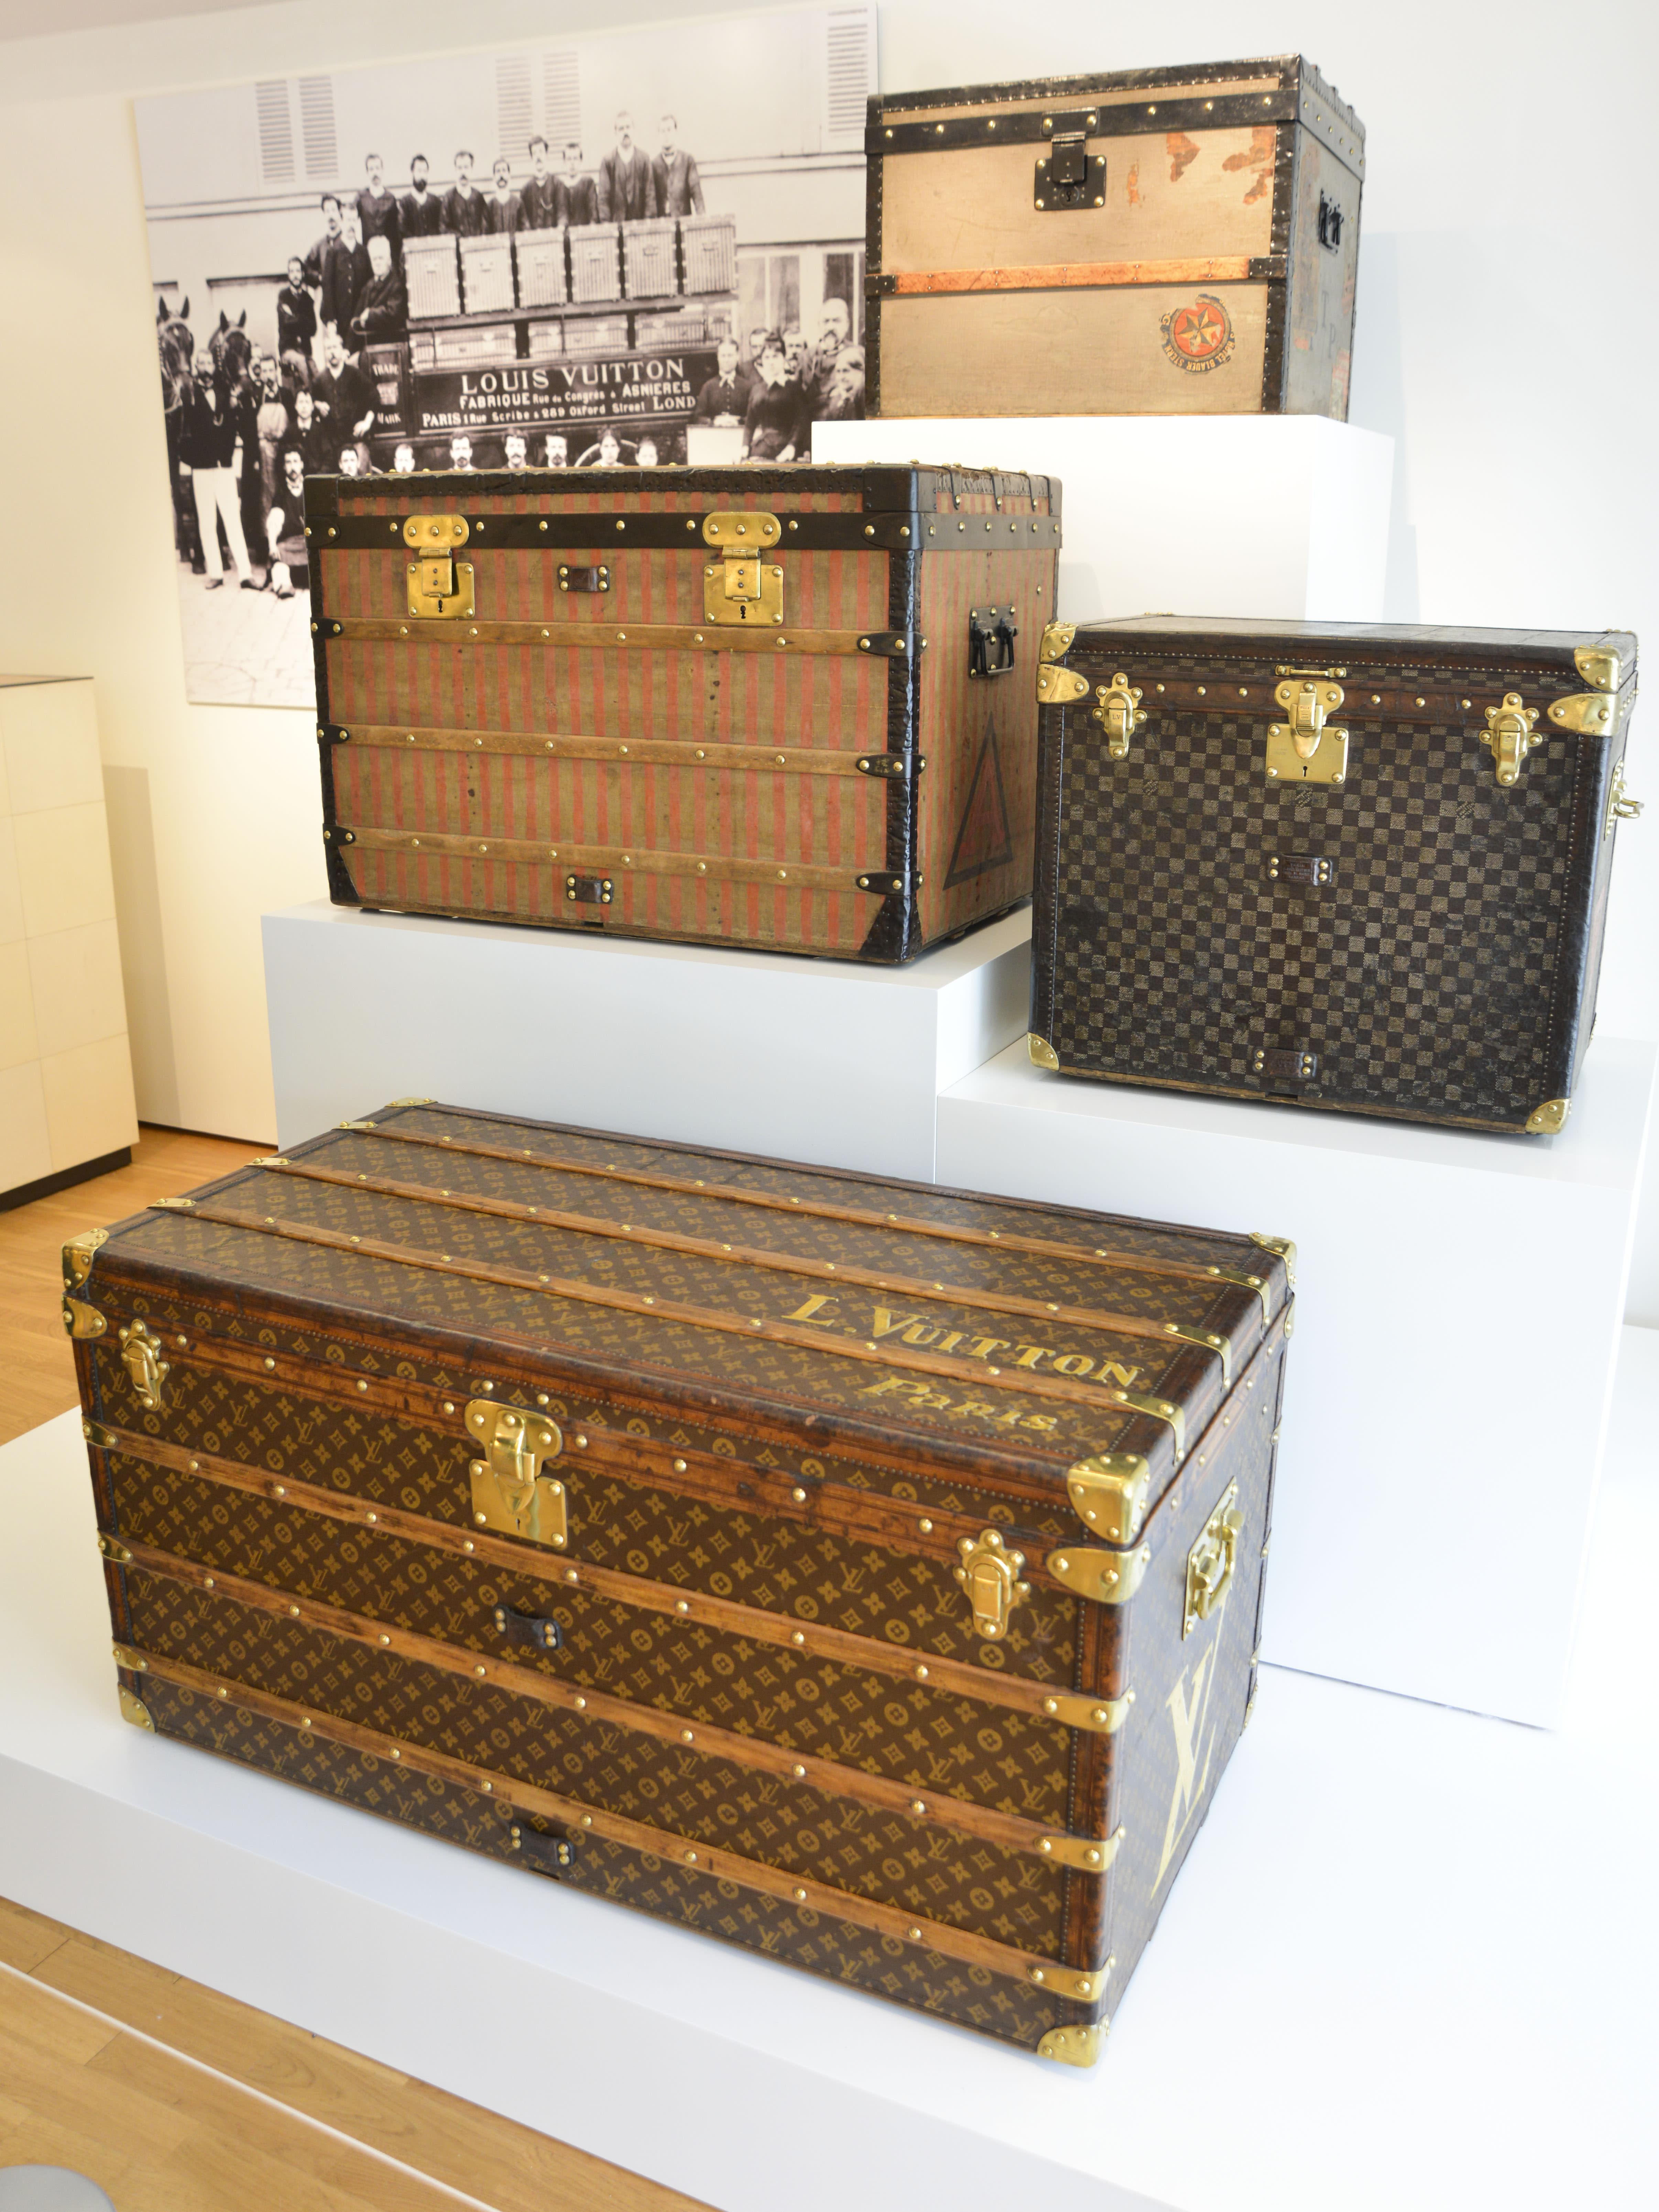 The new iteration of the Louis Vuitton trunk harks back to the family home